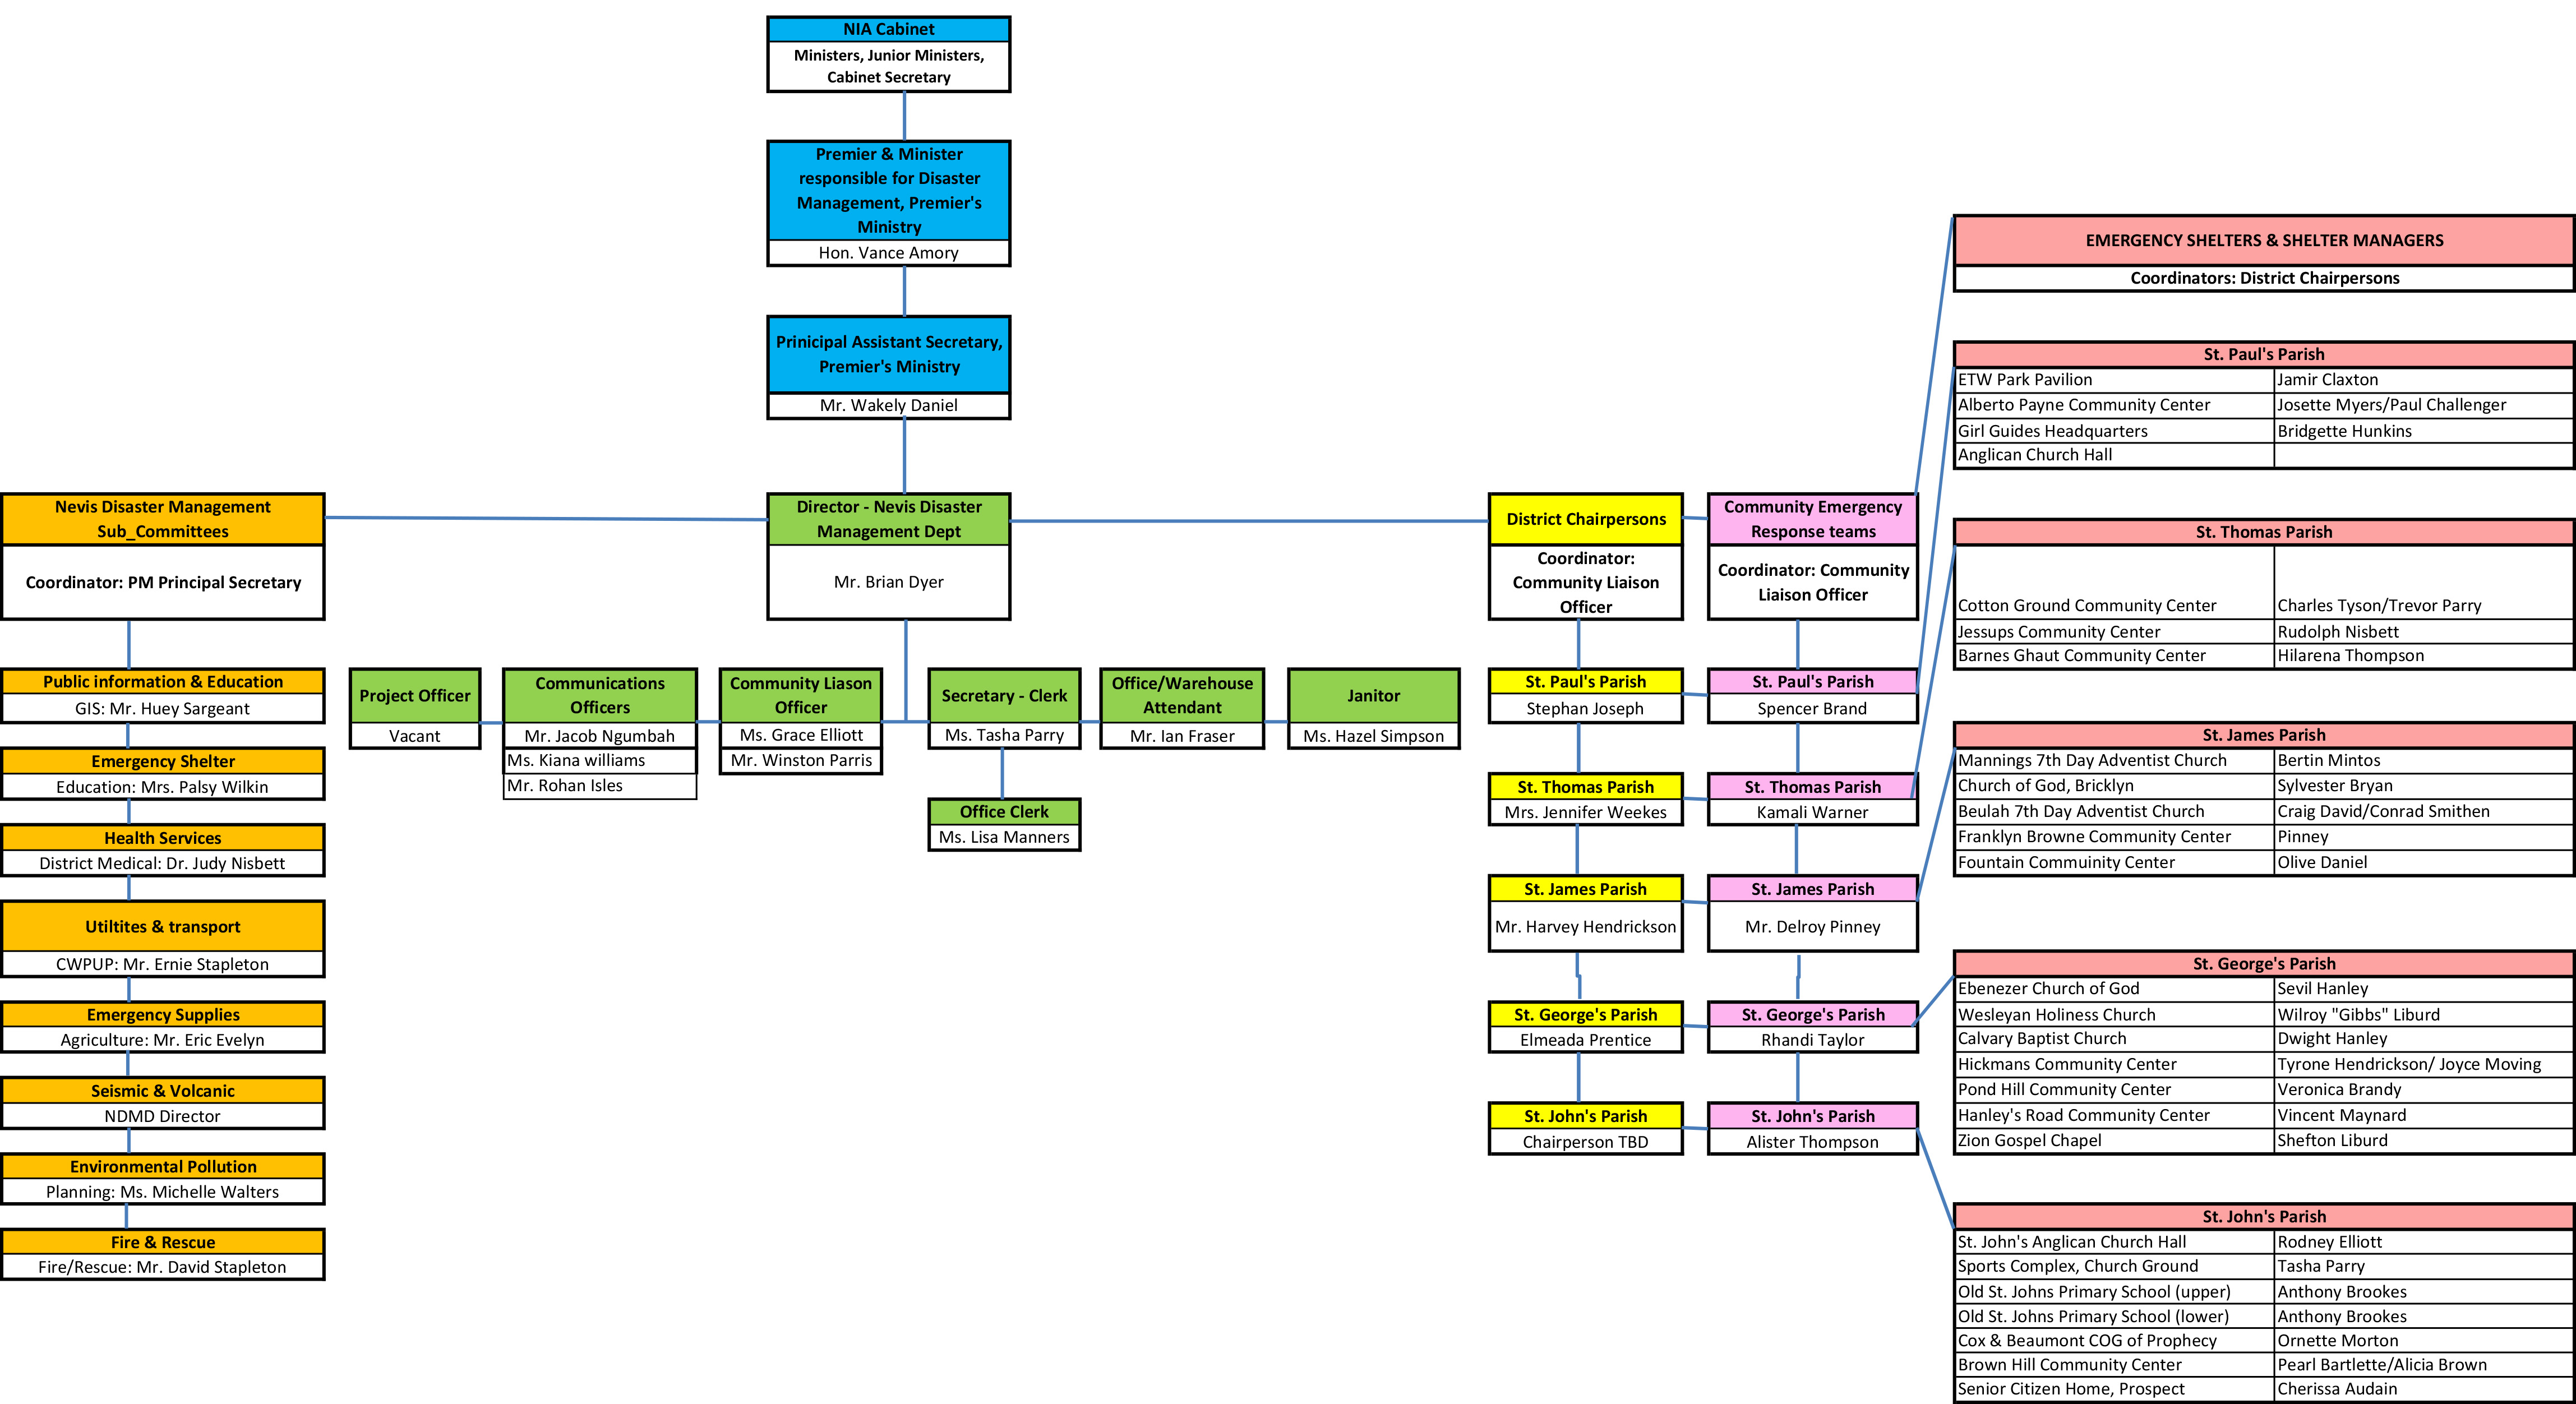 Incident Command System Organizational Chart